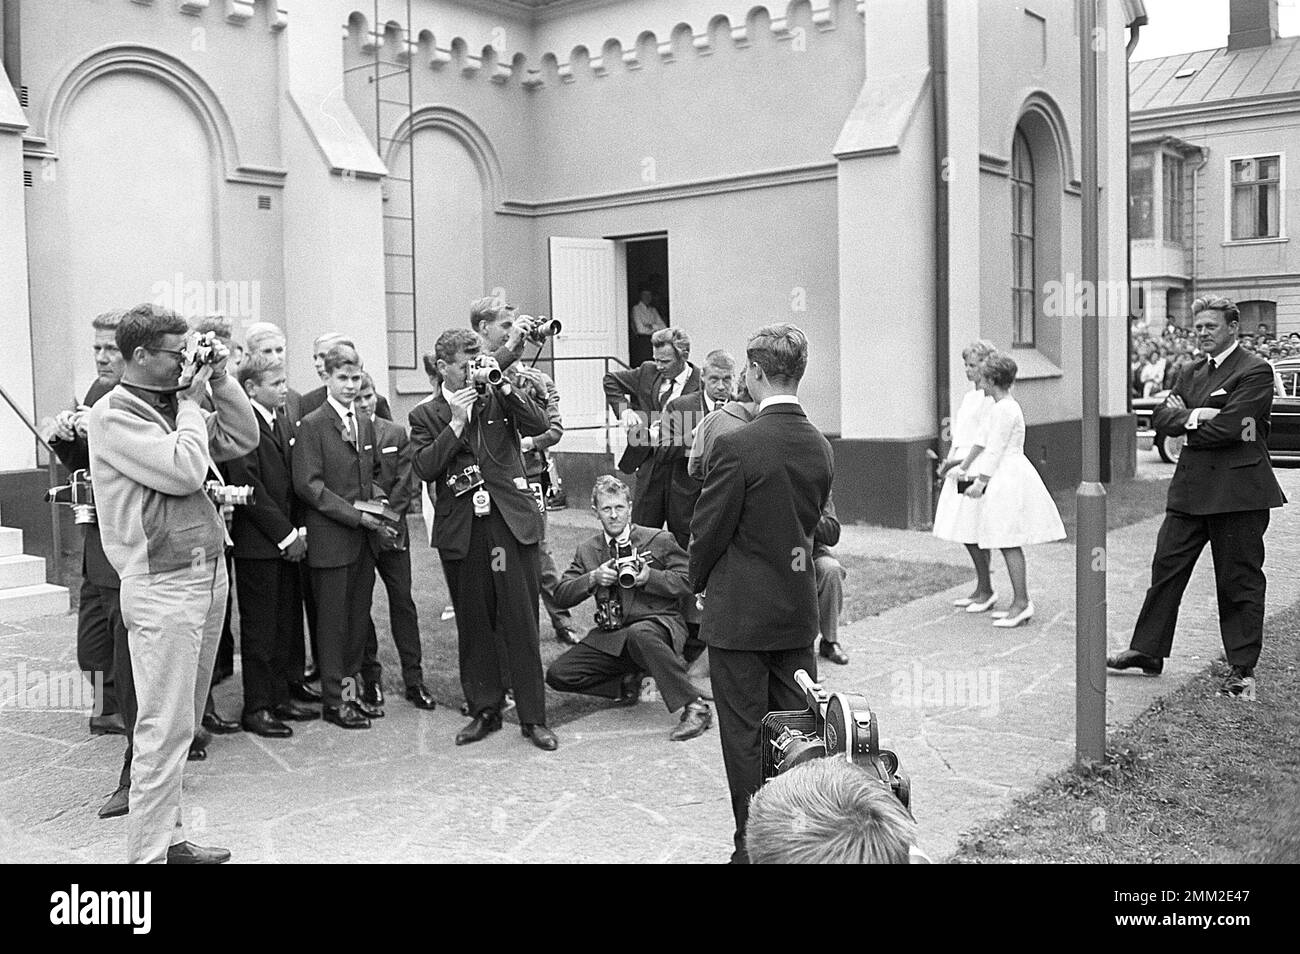 Carl XVI Gustaf, King of Sweden. Born 30 april 1946. Picture taken in connection with his confirmation 21 july 1962 at Borgholms church on the island of Öland. The pressphotographers are seen taking pictures. ref SC1020 Stock Photo